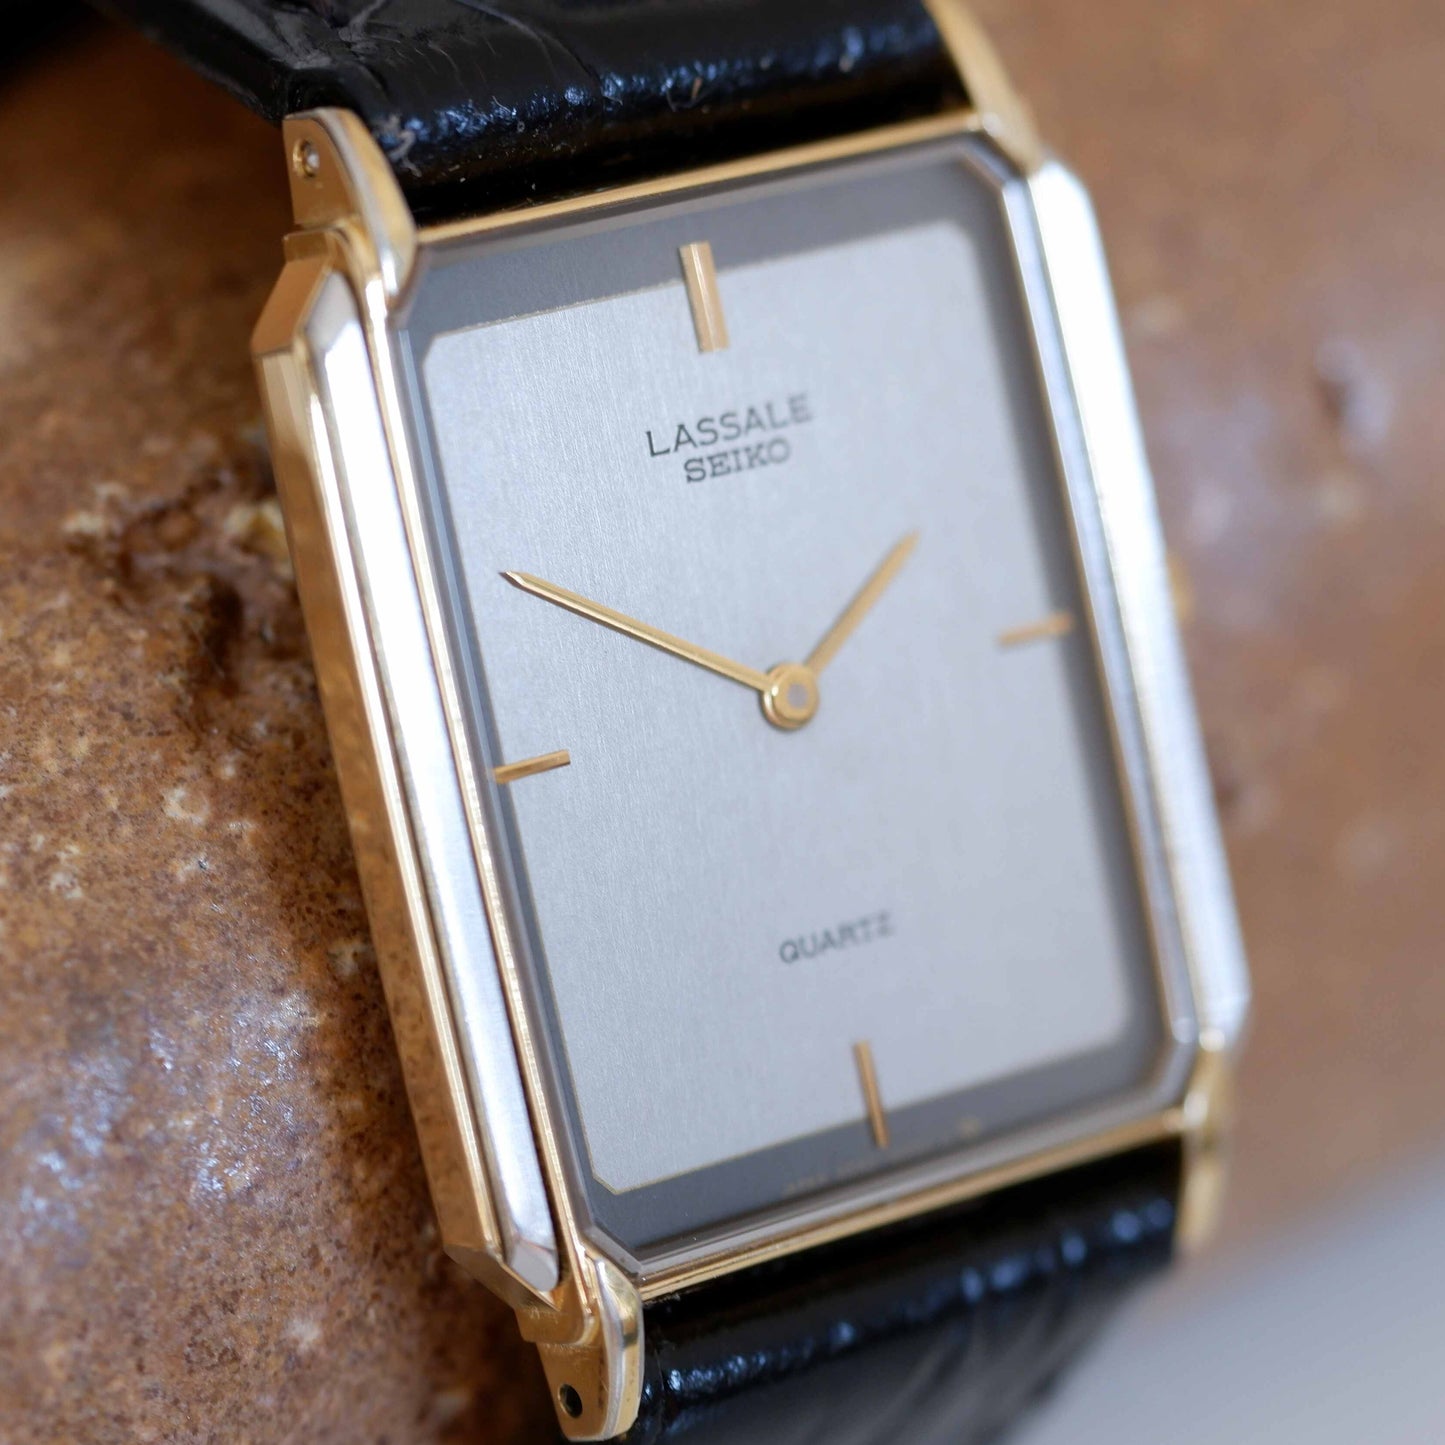 Seiko Lassale Vintage Ladies Watch: 80s Two-Tone Rectangular Style with Gray Dial | Slight Left View